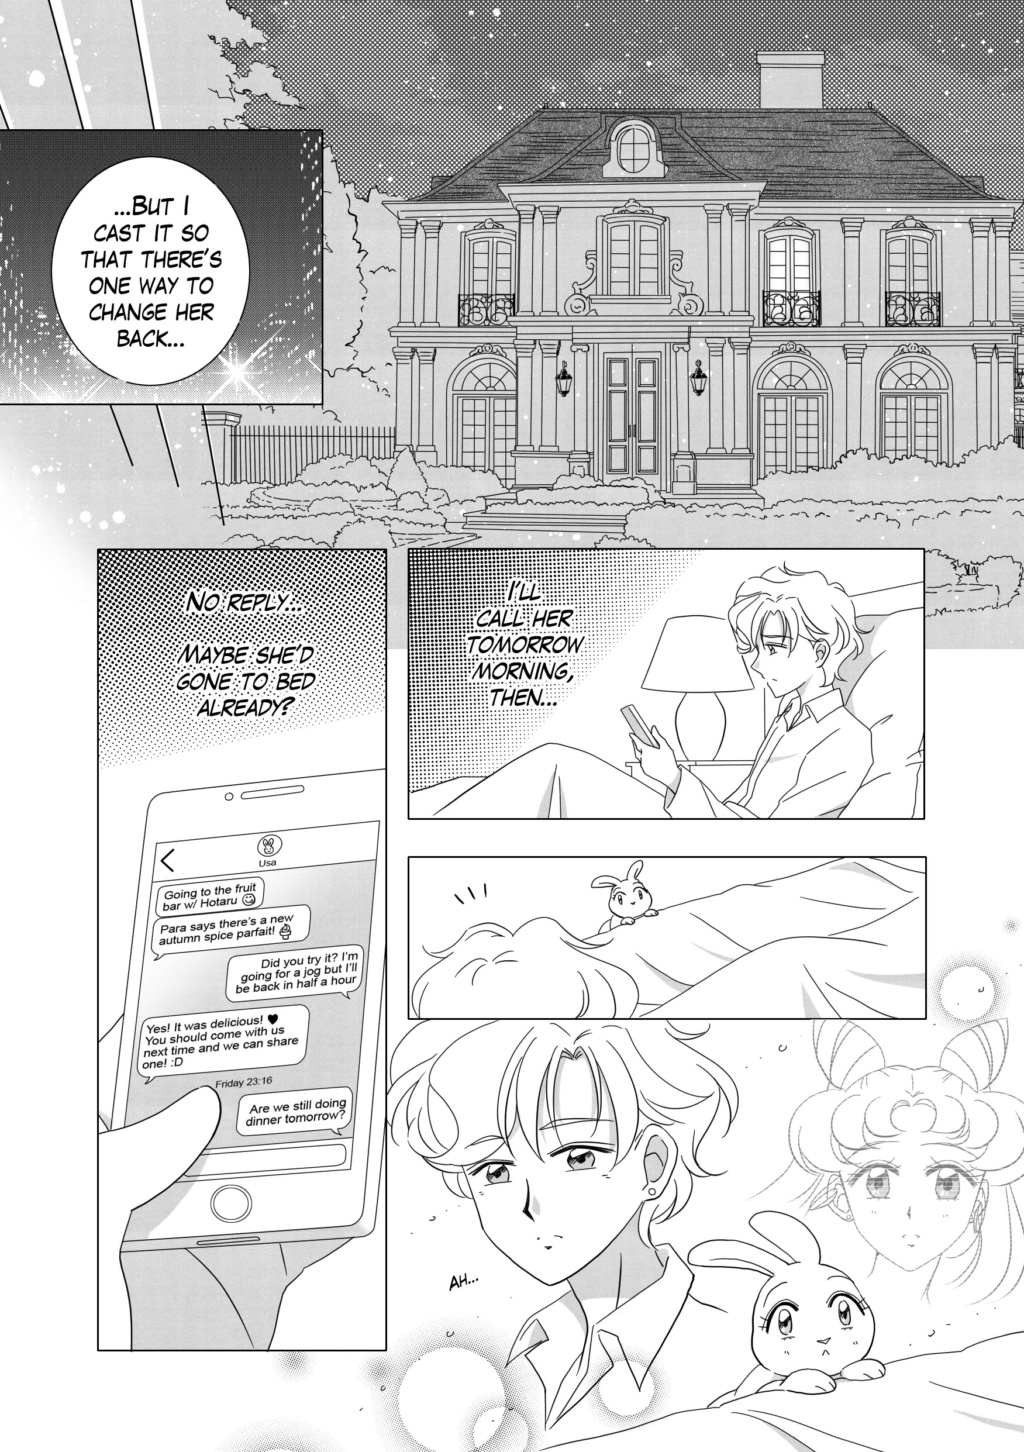 [F] My 30th century Chibi-Usa x Helios doujinshi project: UPDATED 11-25-18 - Page 19 Sbs_pg35